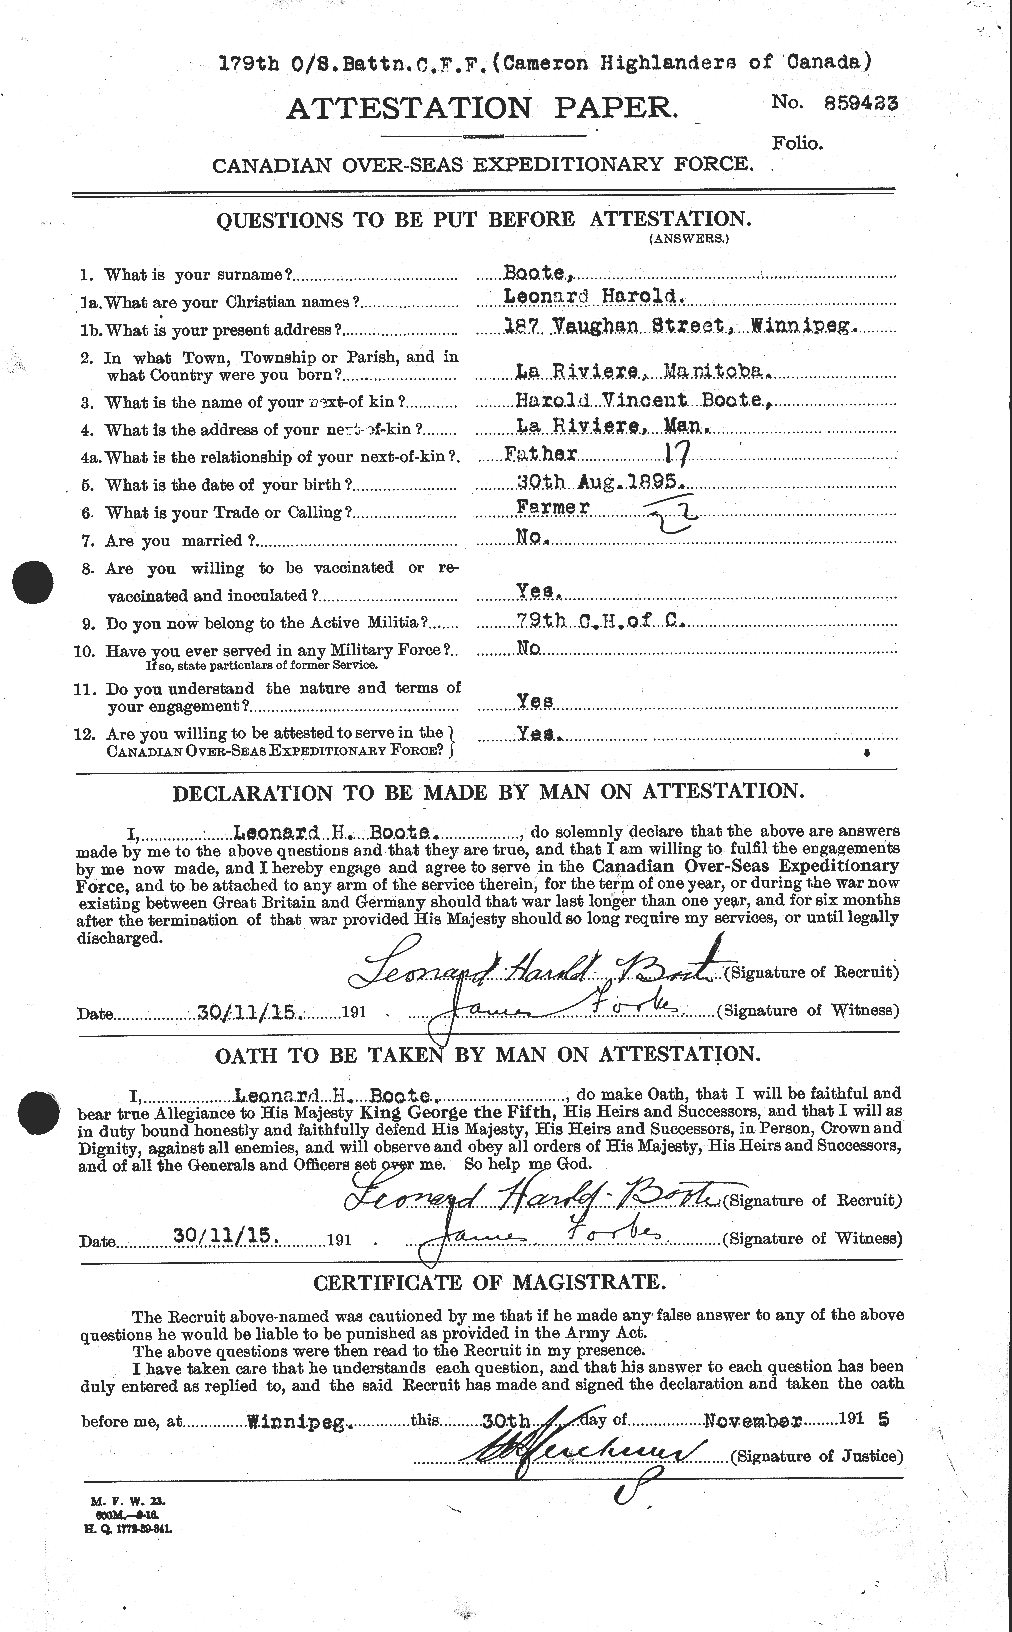 Personnel Records of the First World War - CEF 251406a